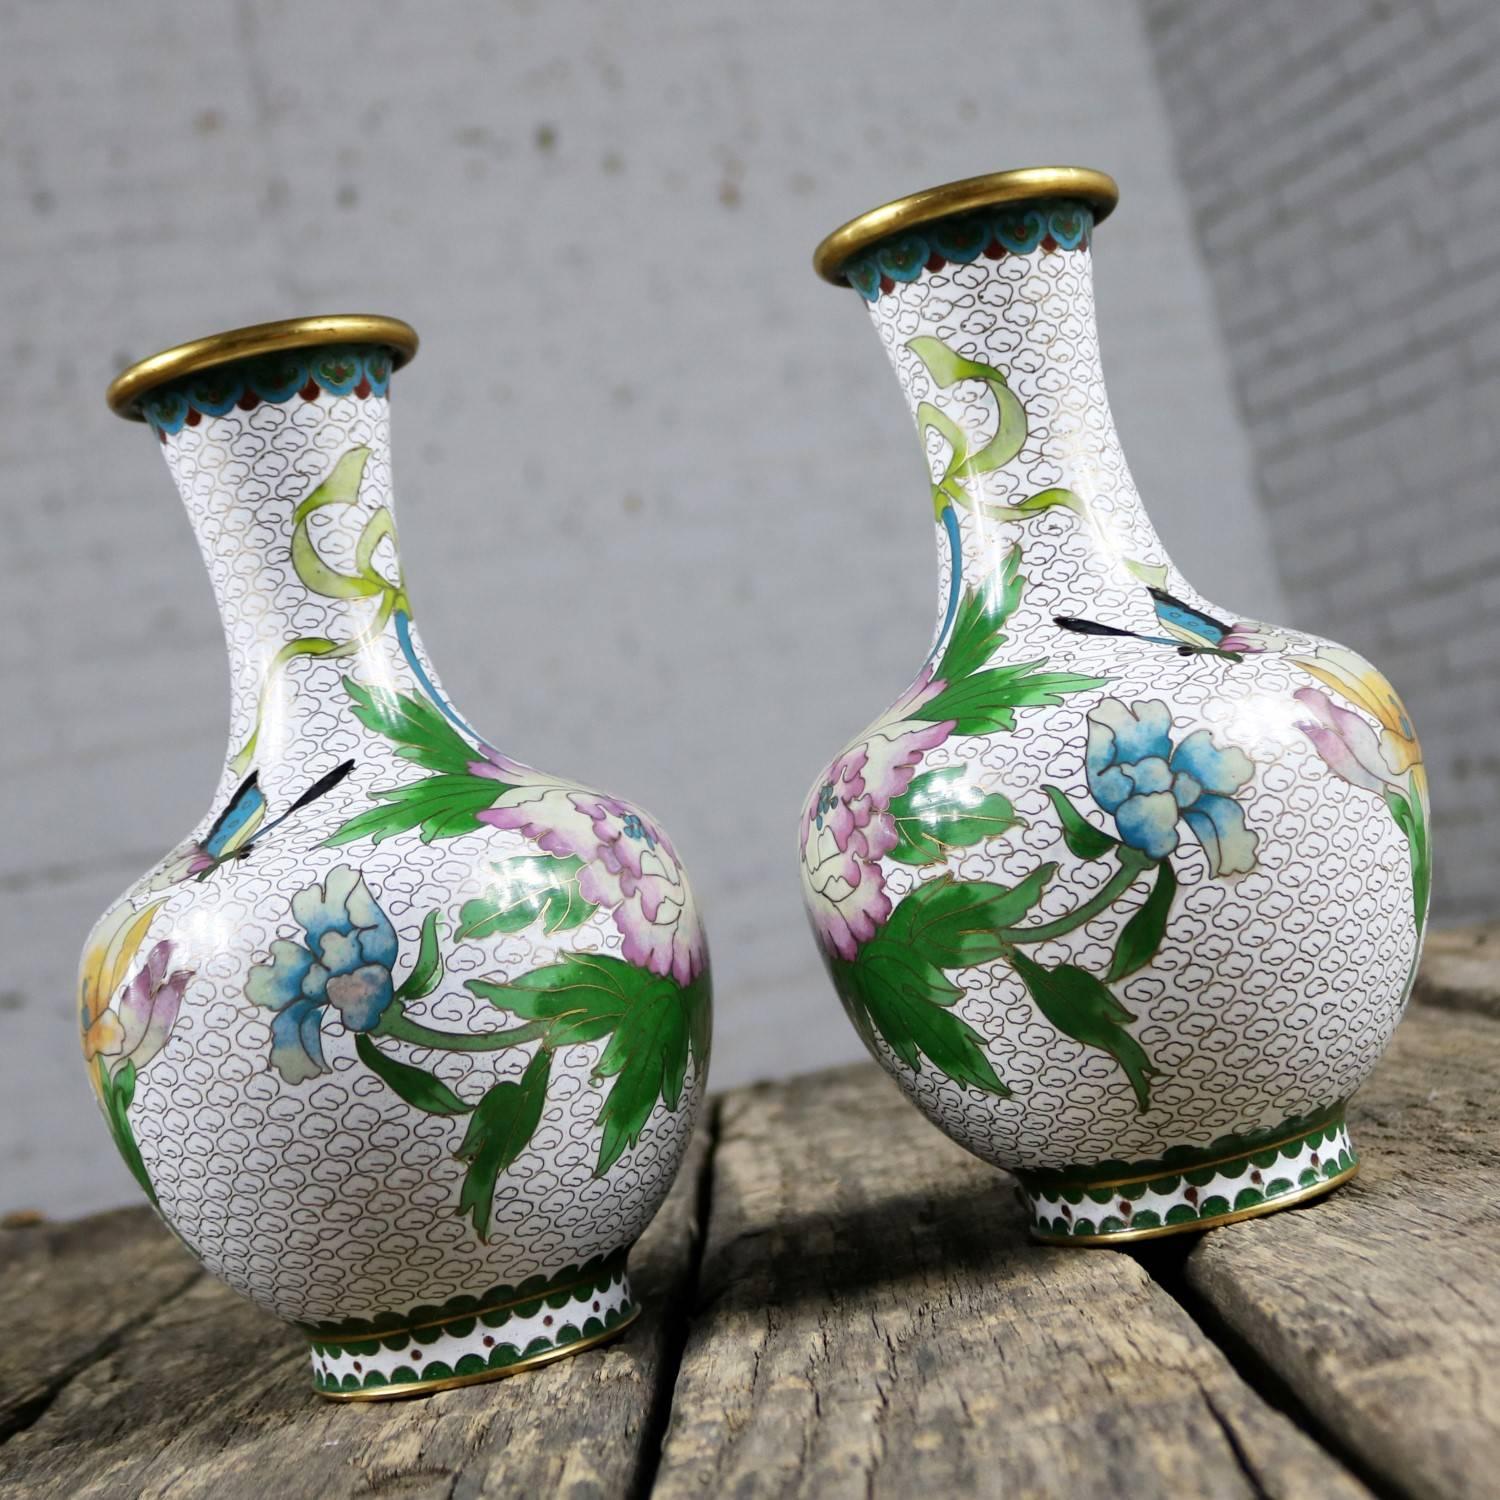 Chinese Export Pair of Mirrored Design White Cloisonné Vases Multicolored Floral and Butterfly